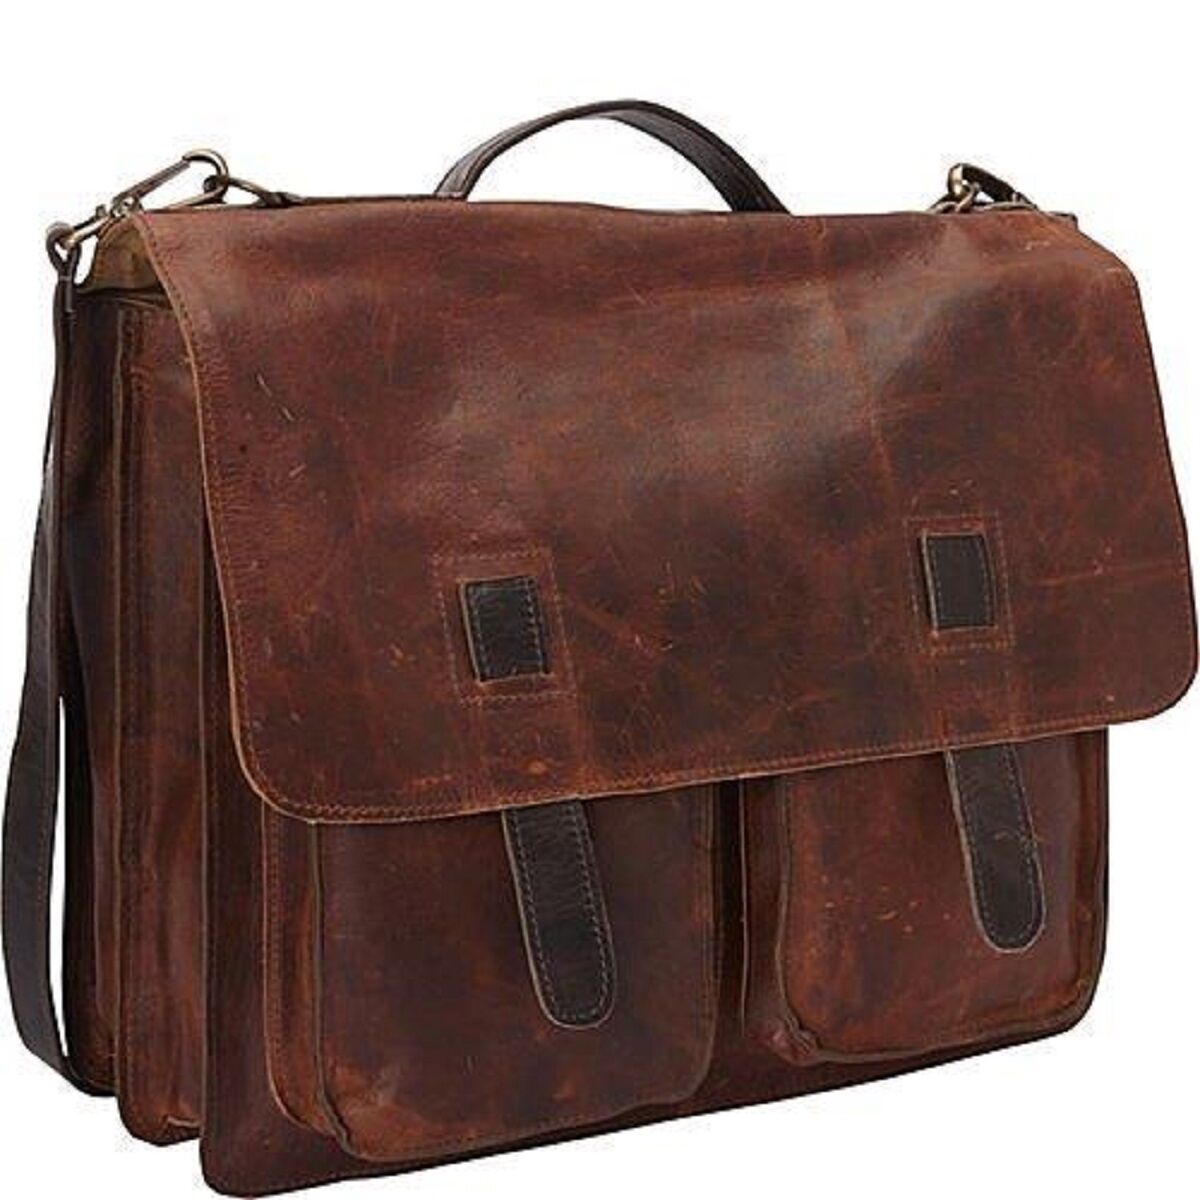 Picture of Sharo TT-100 Vintage Two-Toned Executive Messenger Briefcase